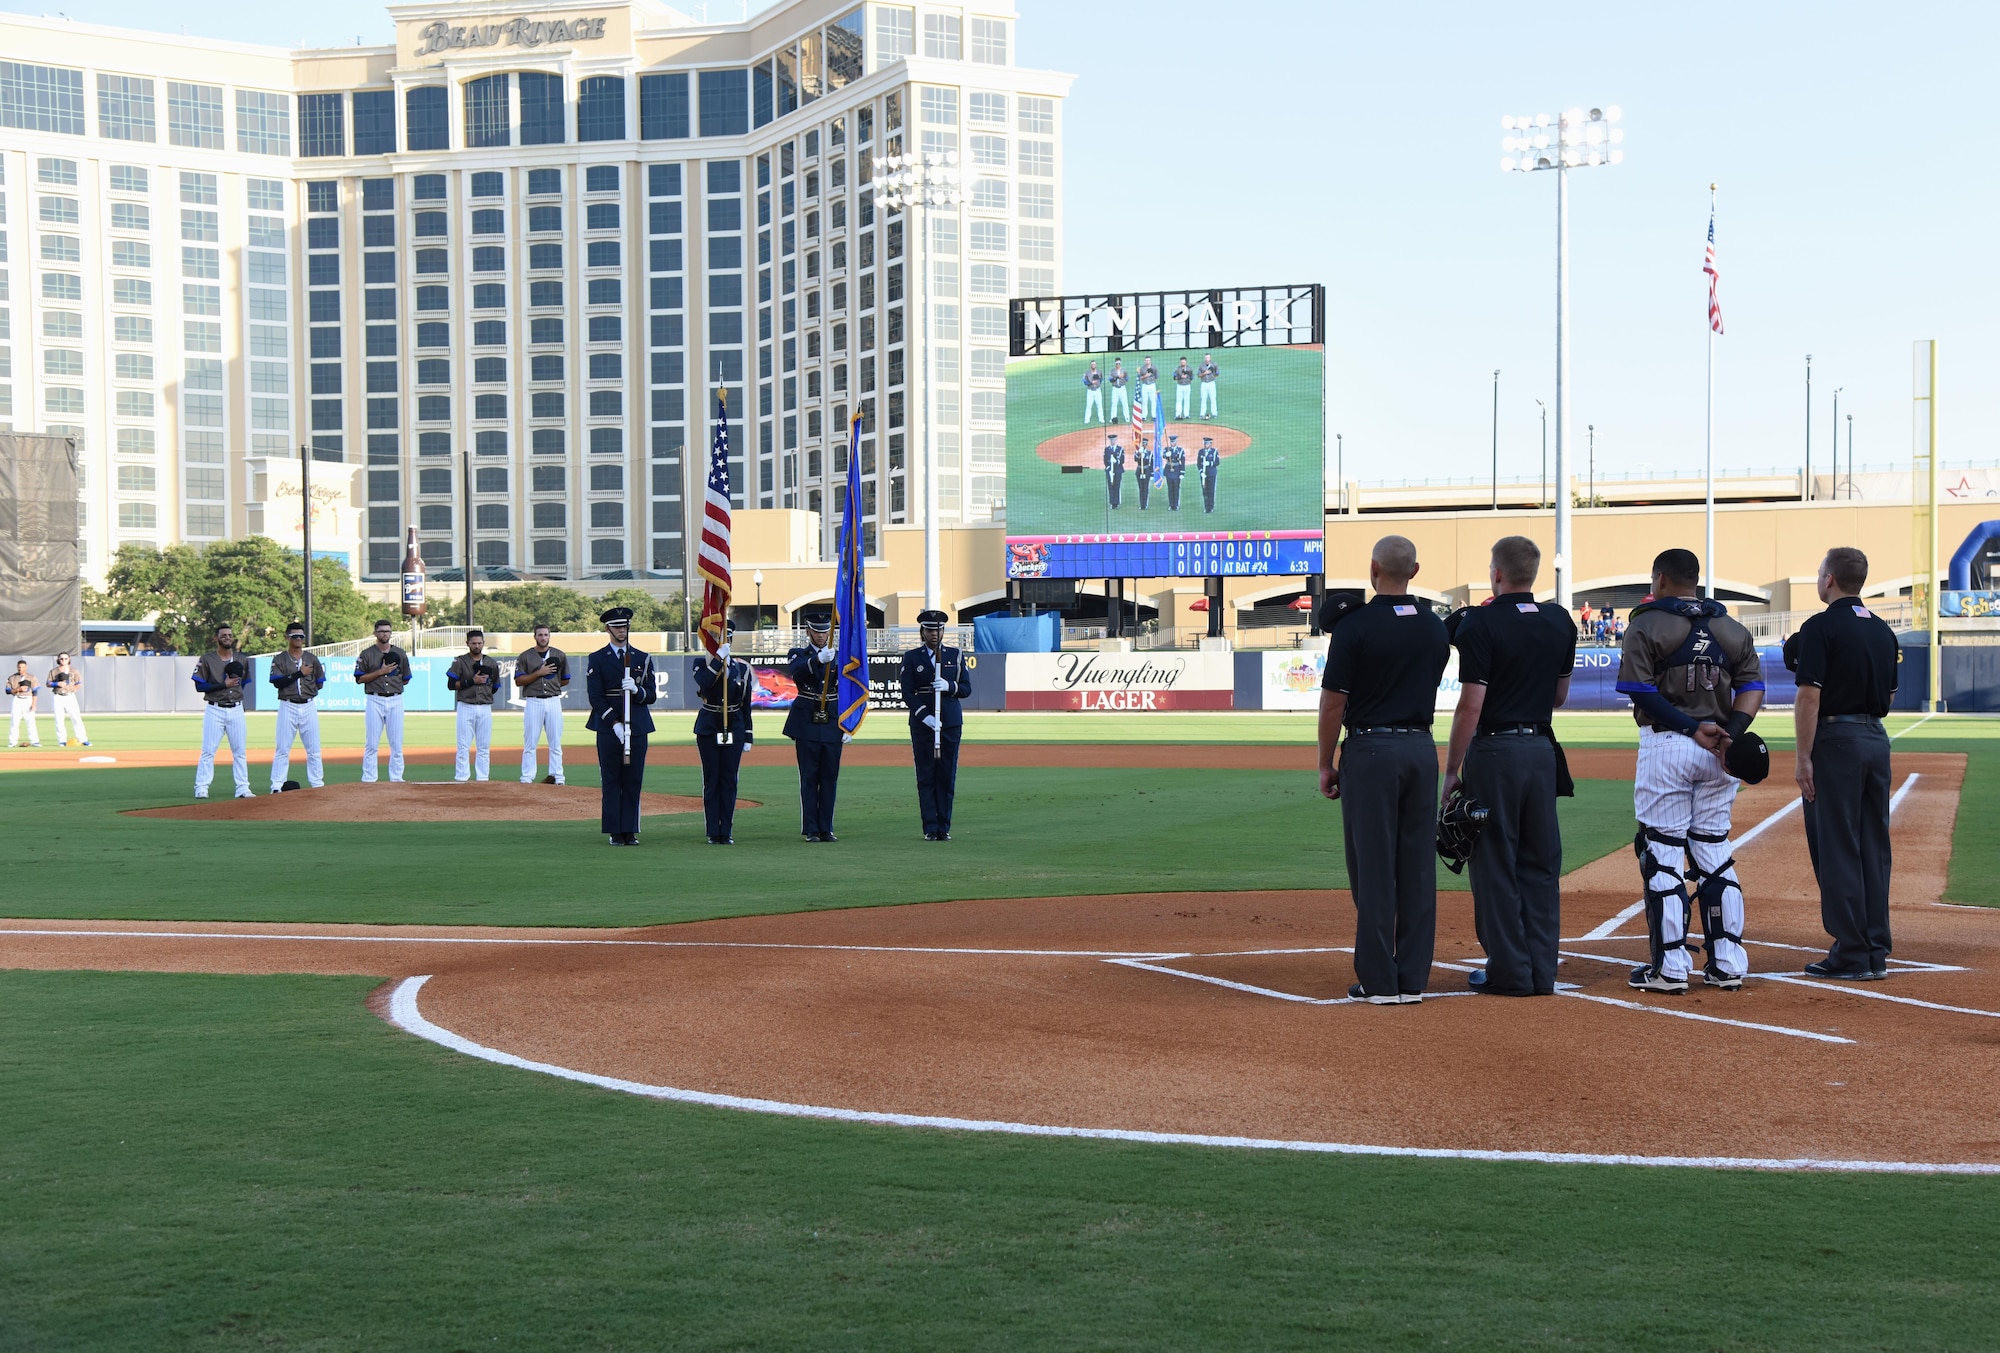 Keesler Air Force Base Honor Guard members present the colors during the Biloxi Shuckers Minor League Baseball team’s military appreciation night July 31, 2017, in Biloxi, Miss. The Shuckers recognized and honored service members and their families for serving the nation. (U.S. Air Force photo by Kemberly Groue)